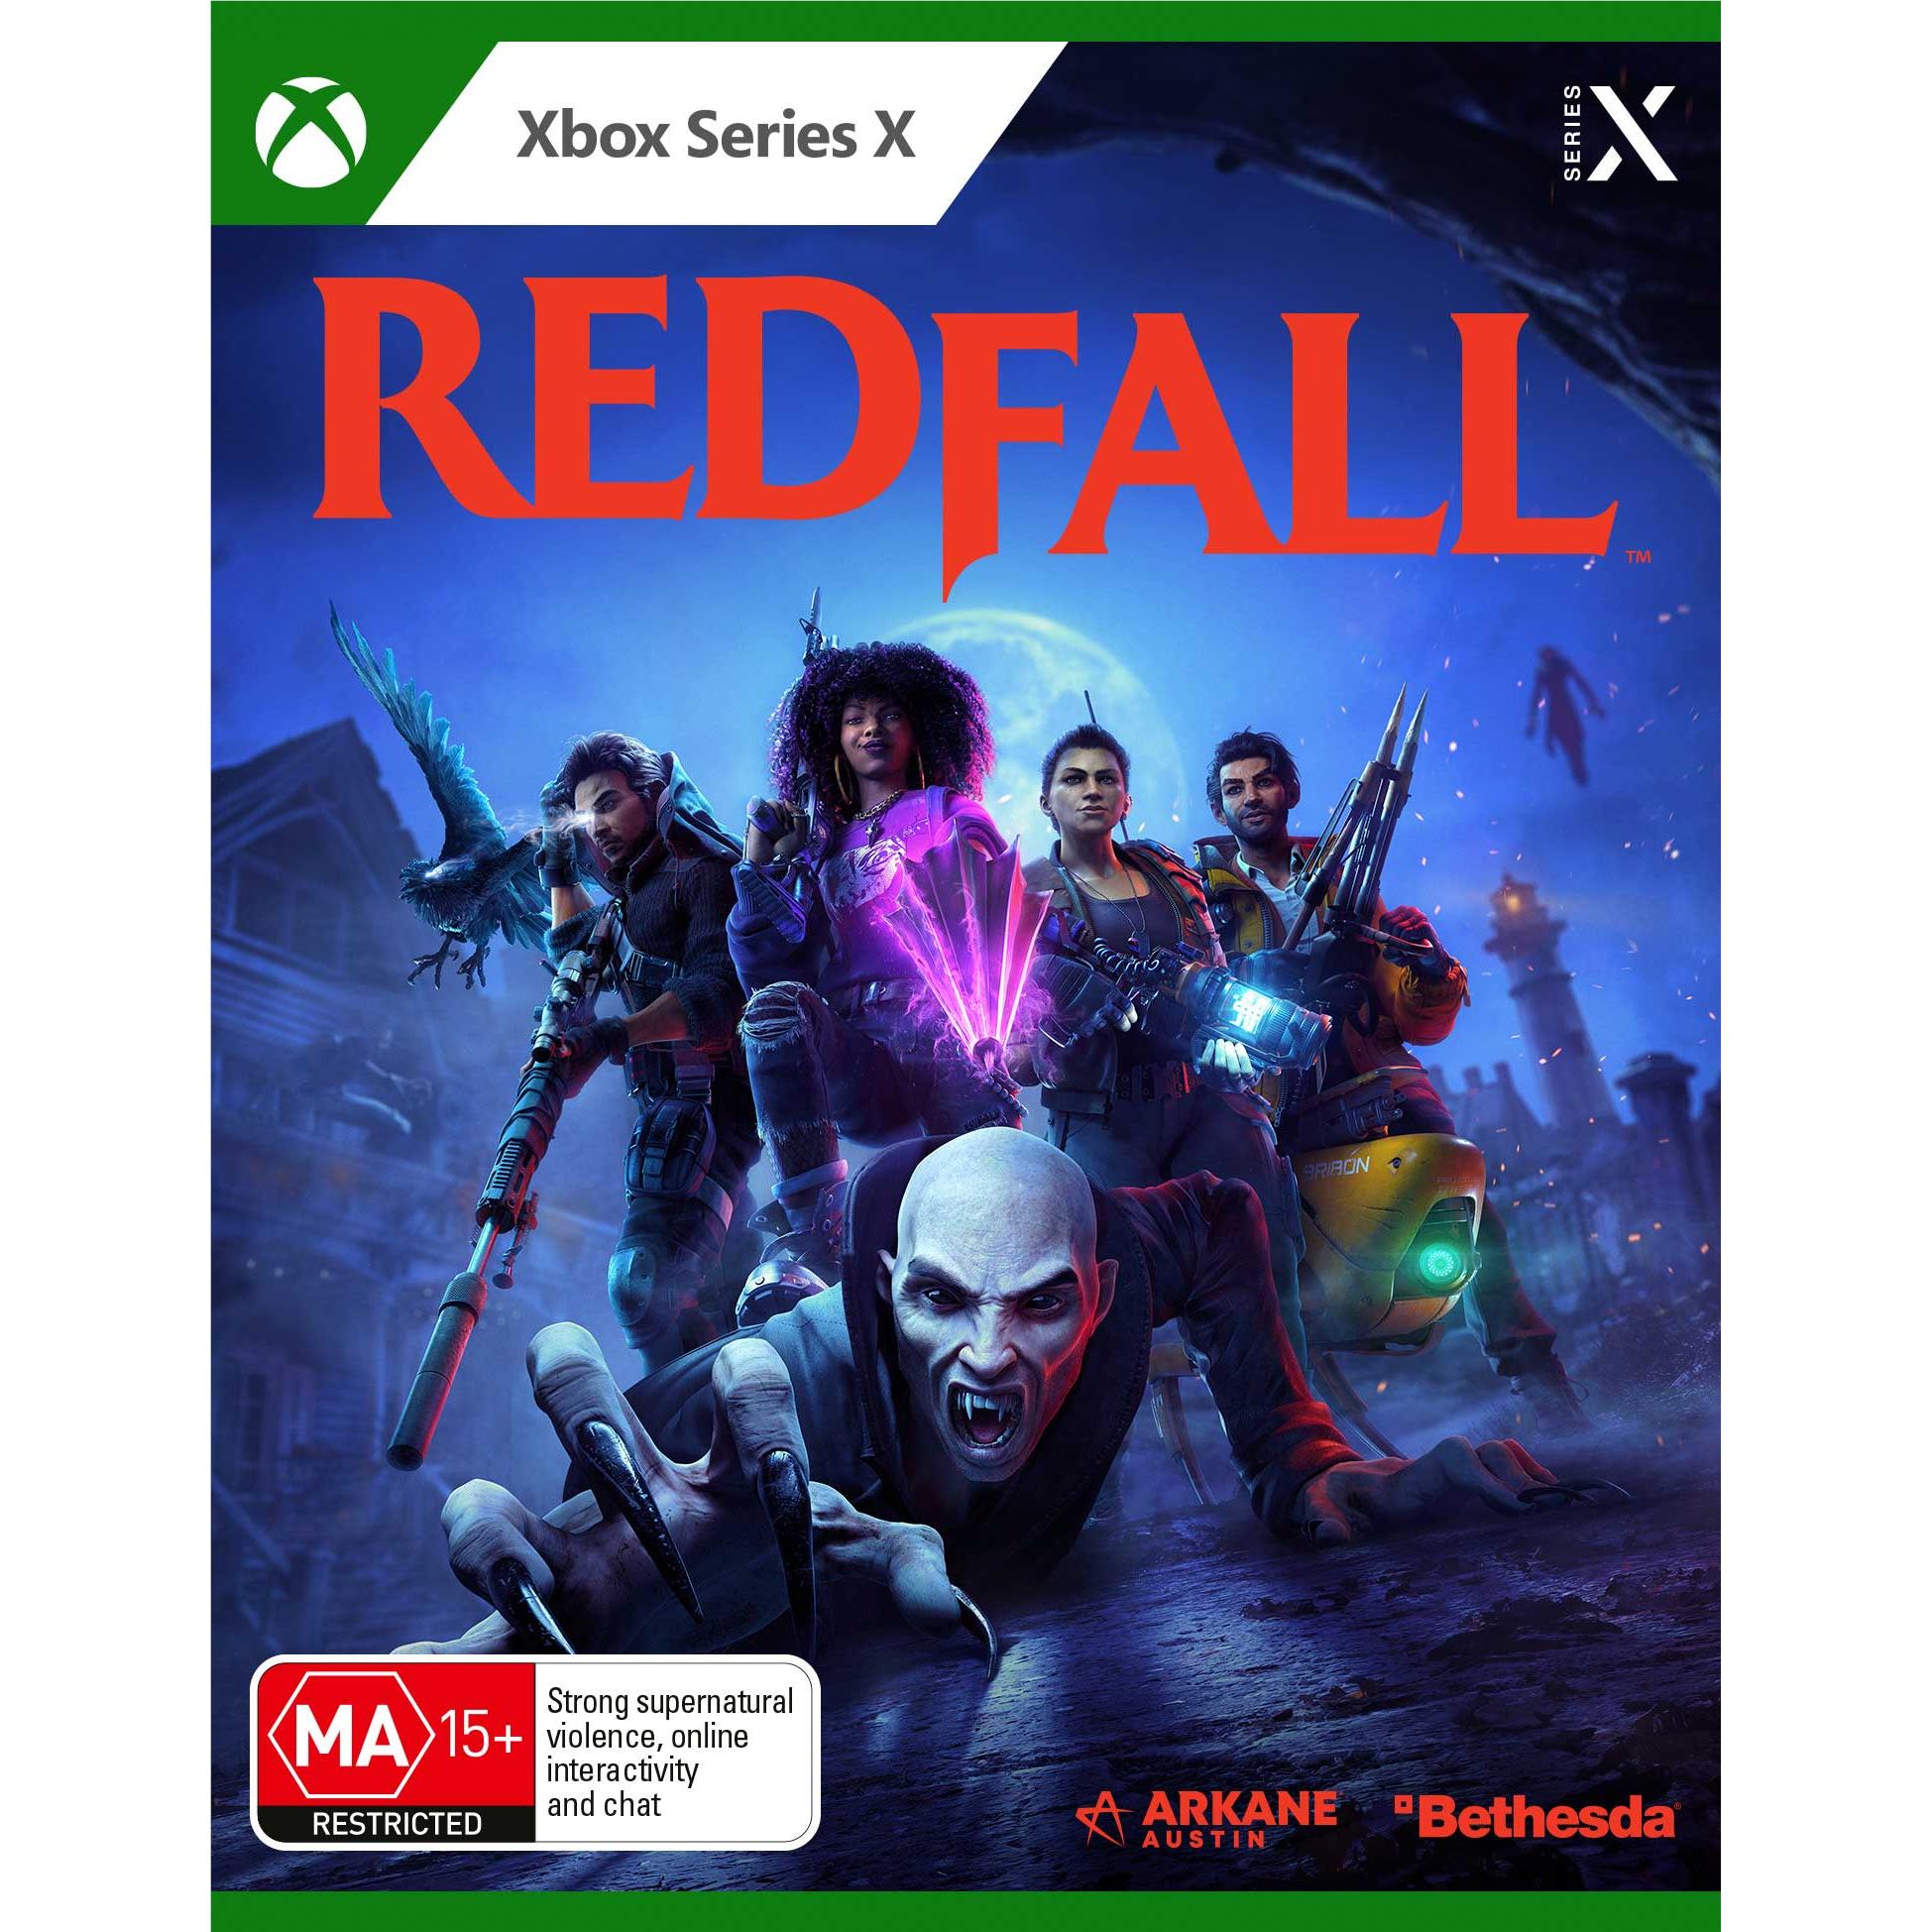 Redfall game length: How long does it take to beat the game?